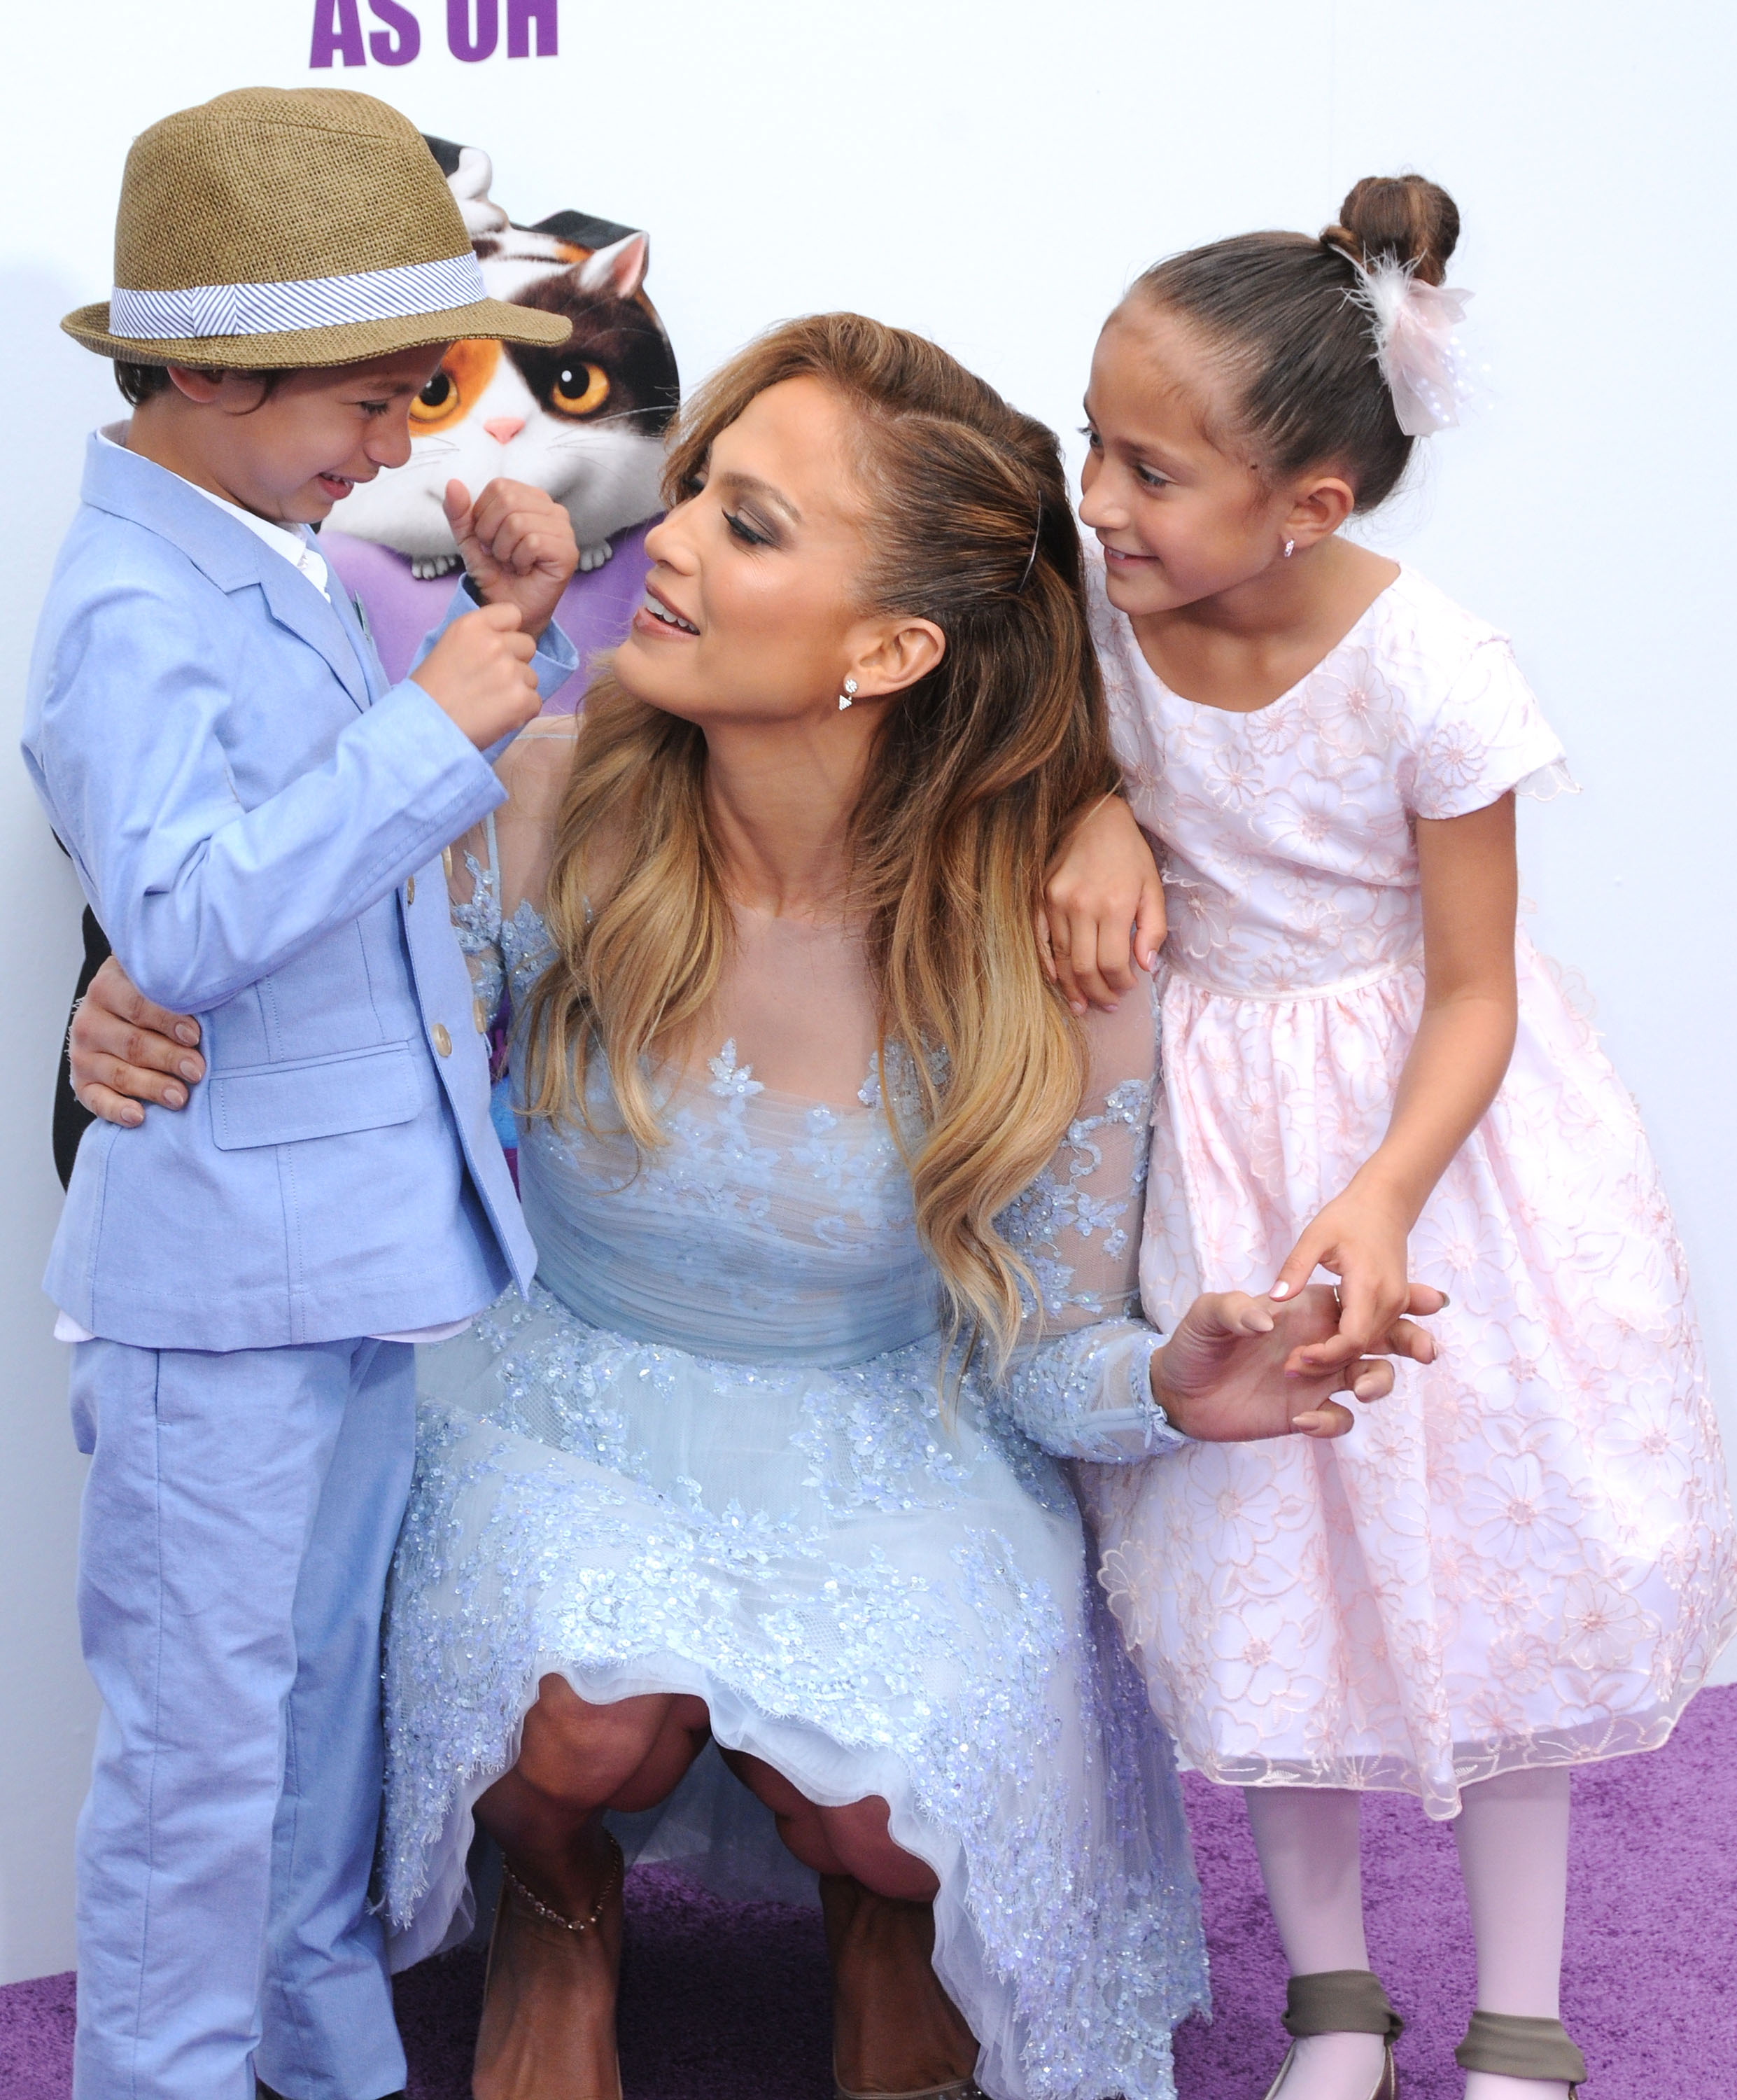 Recording artist/actress Jennifer Lopez (C) and her son Maximillian David Muniz (L) and daughter Emme Maribel Muniz (R) arrive at Twentieth Century Fox And Dreamworks Animation's 'Home' Premiere at Regency Village Theatre on March 22, 2015 in Westwood, California | Source: Getty Images